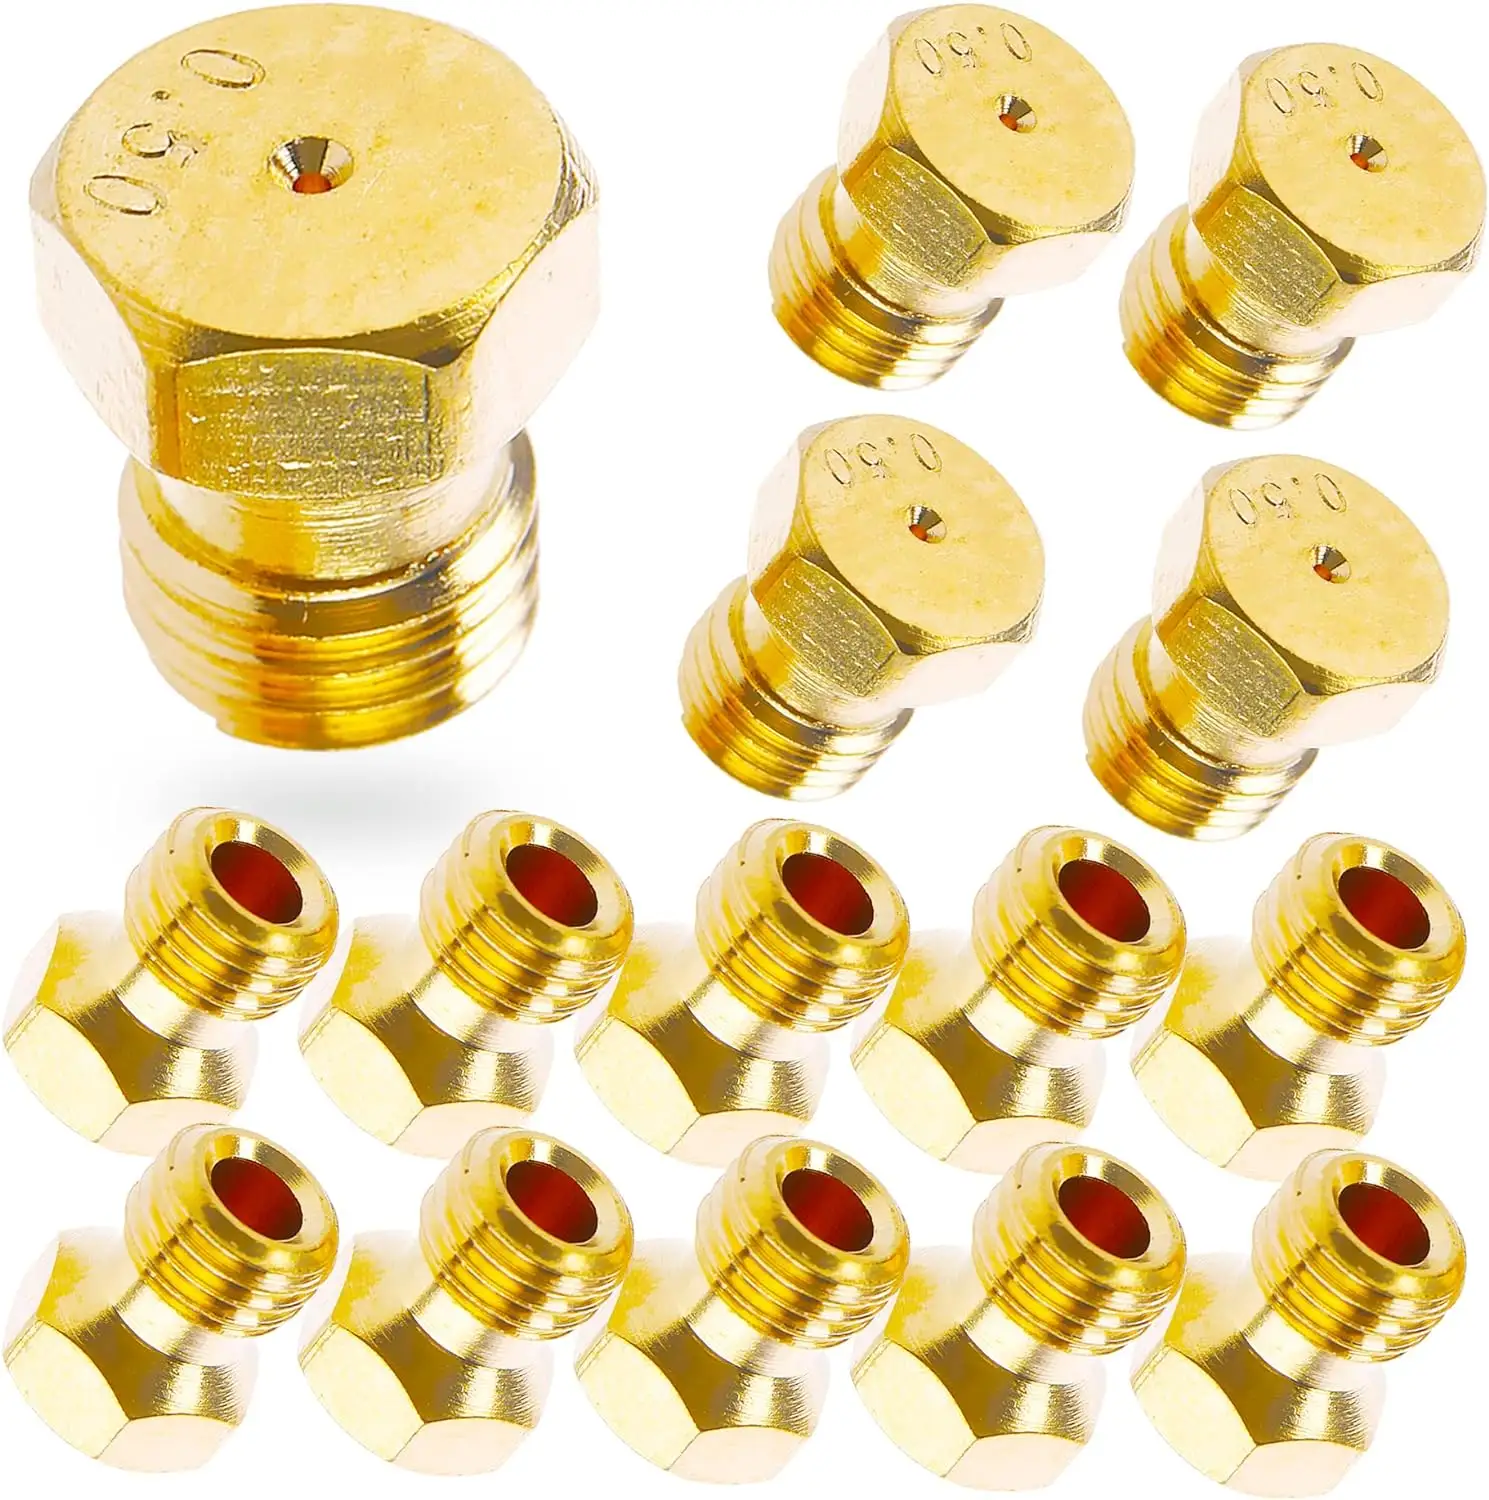 Brass Jet Nozzles M5x0.5mm/0.68mm Propane Gas Orifice Nozzle Replacement for Propane Lpg Gas Pipe Water Heater DIY Burner Parts